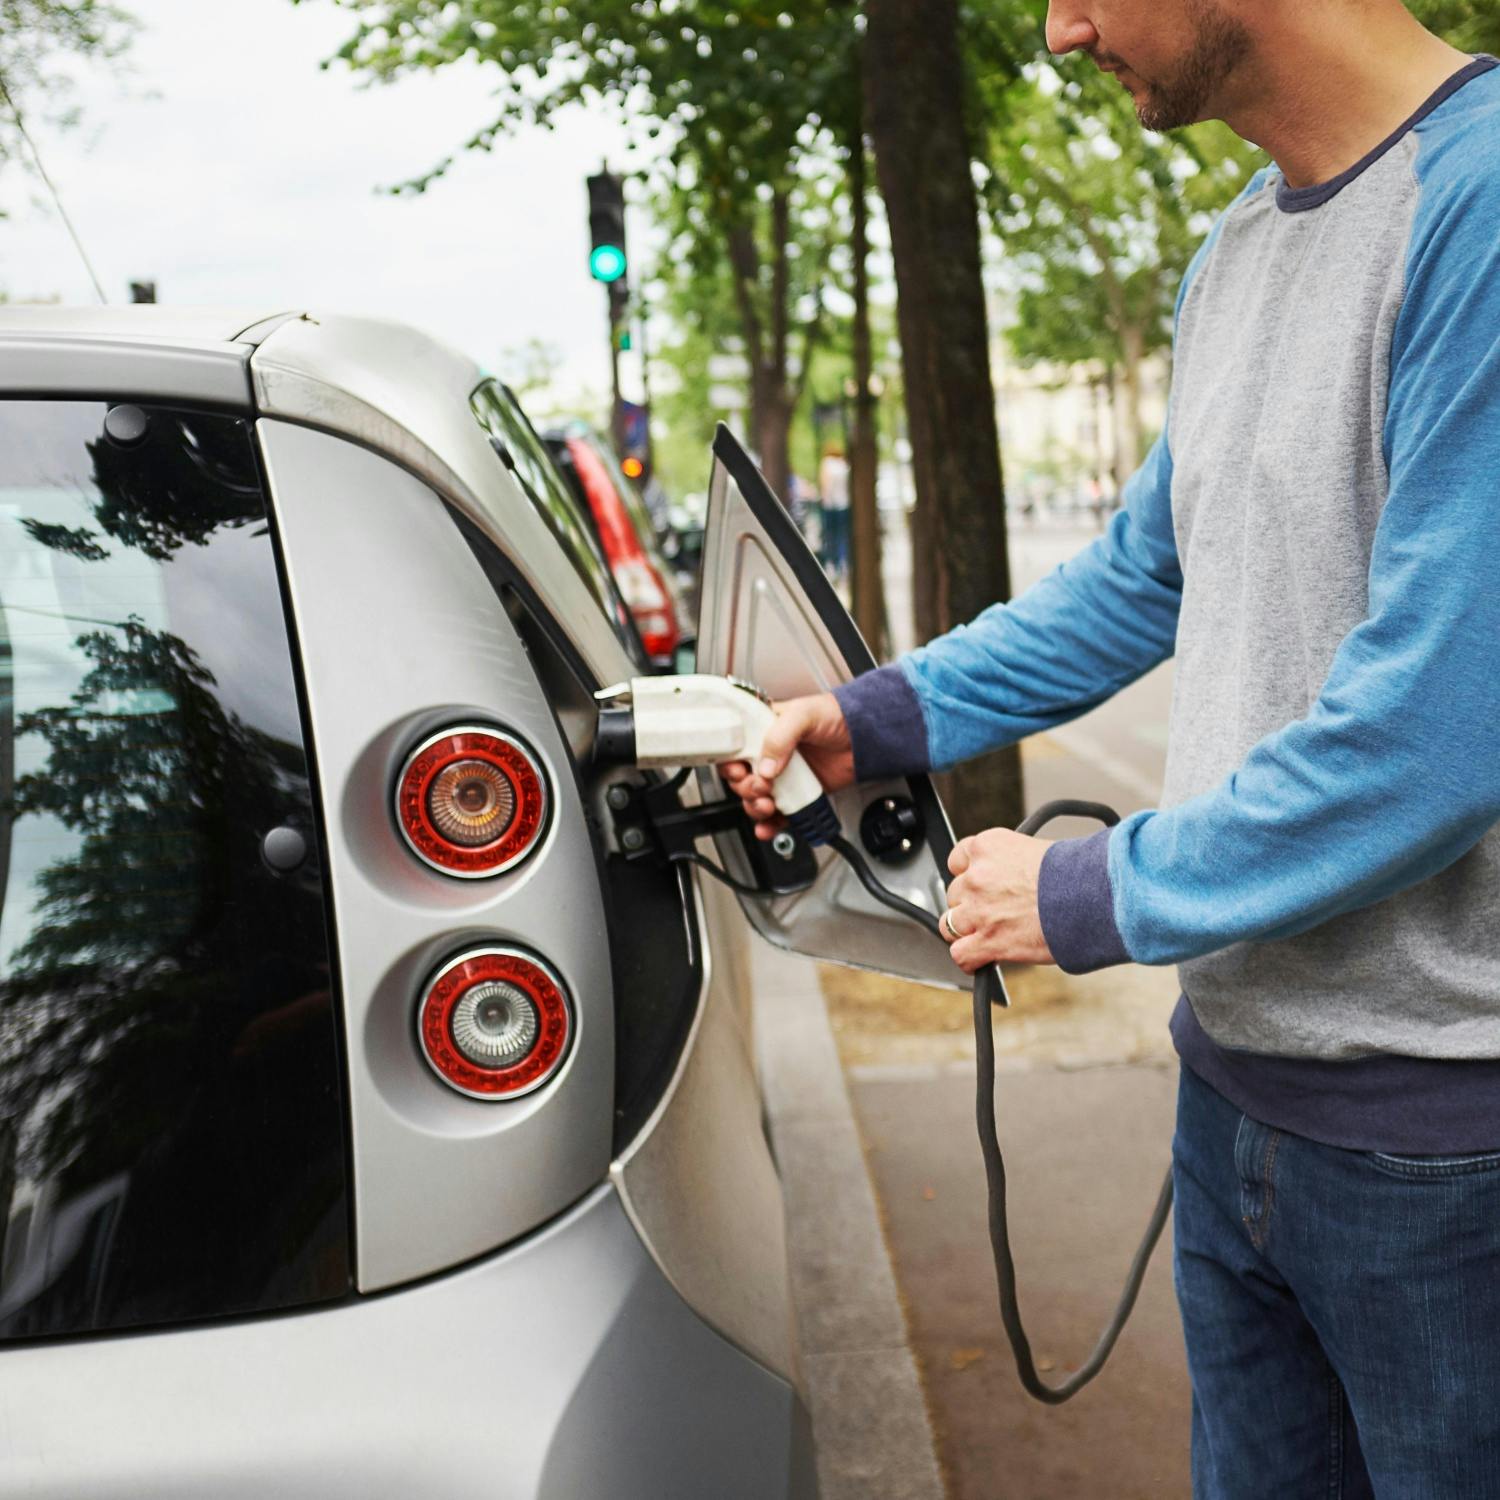 Is Demand For Electric Vehicles Slowing Down?